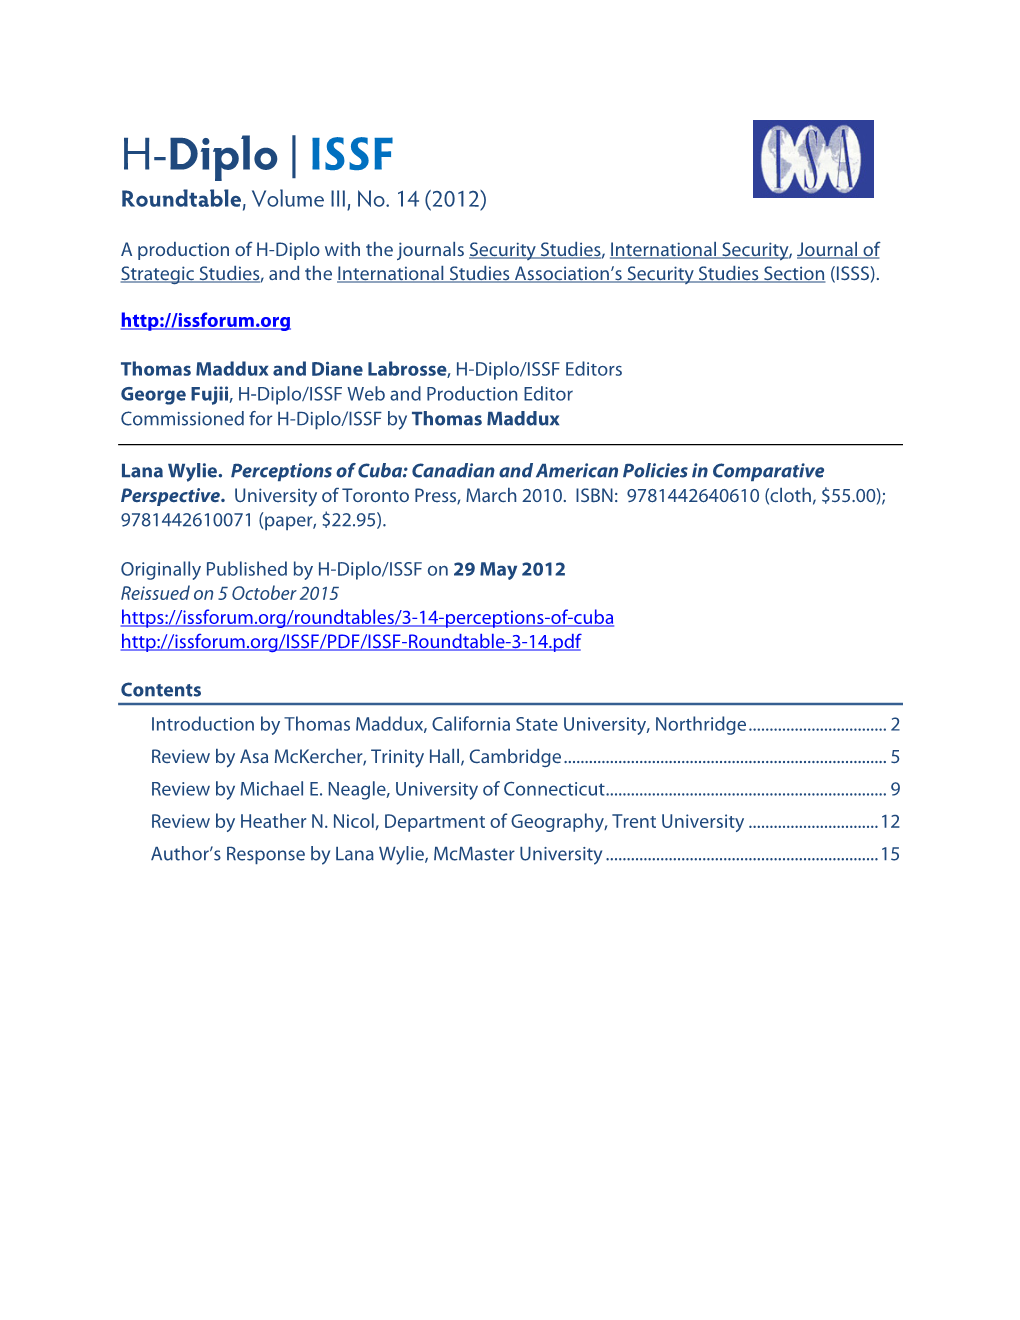 H-Diplo/ISSF Roundtable, Vol. 3, No. 14 (2012)